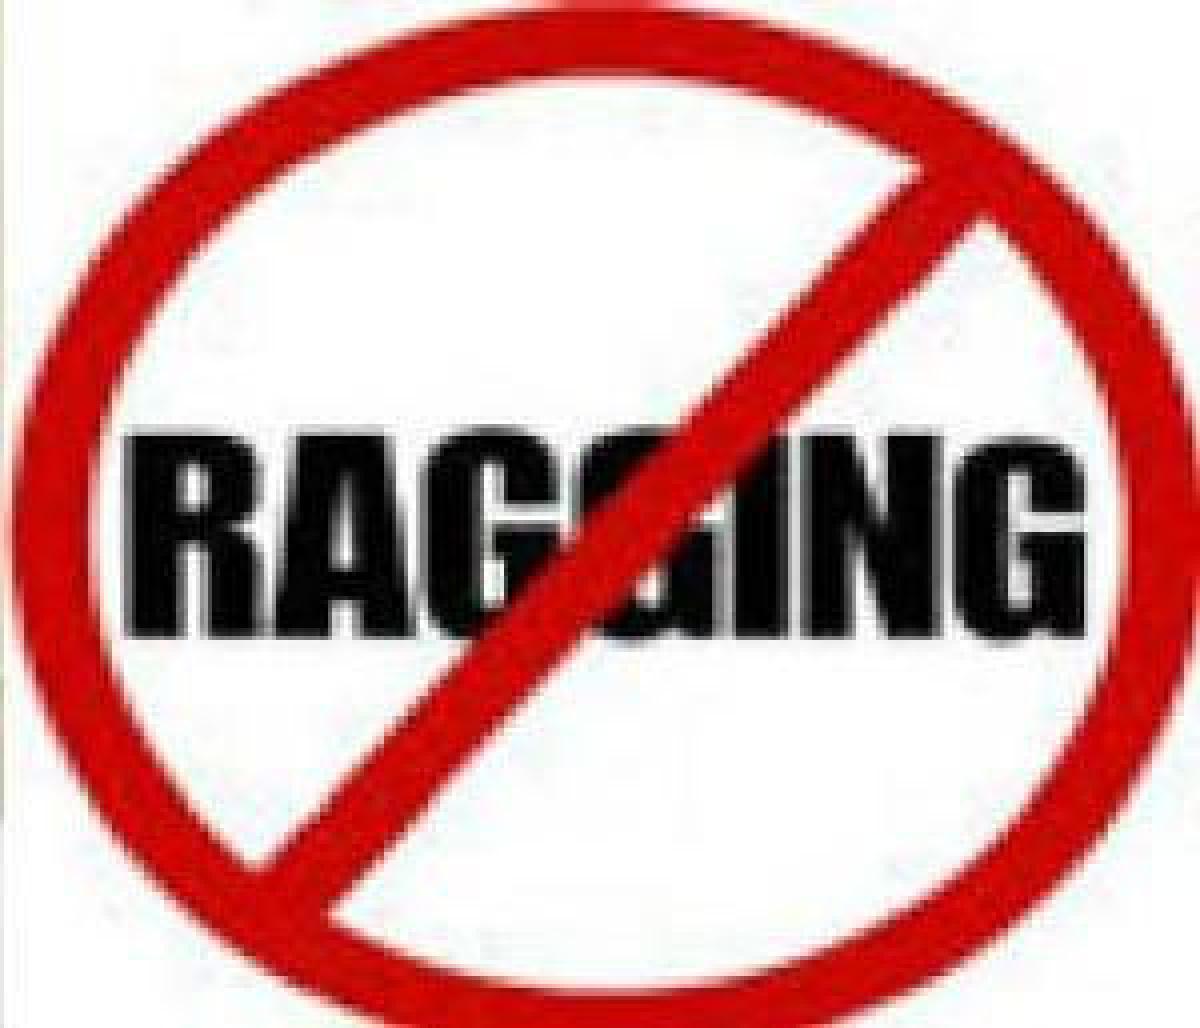 Students warned against ragging